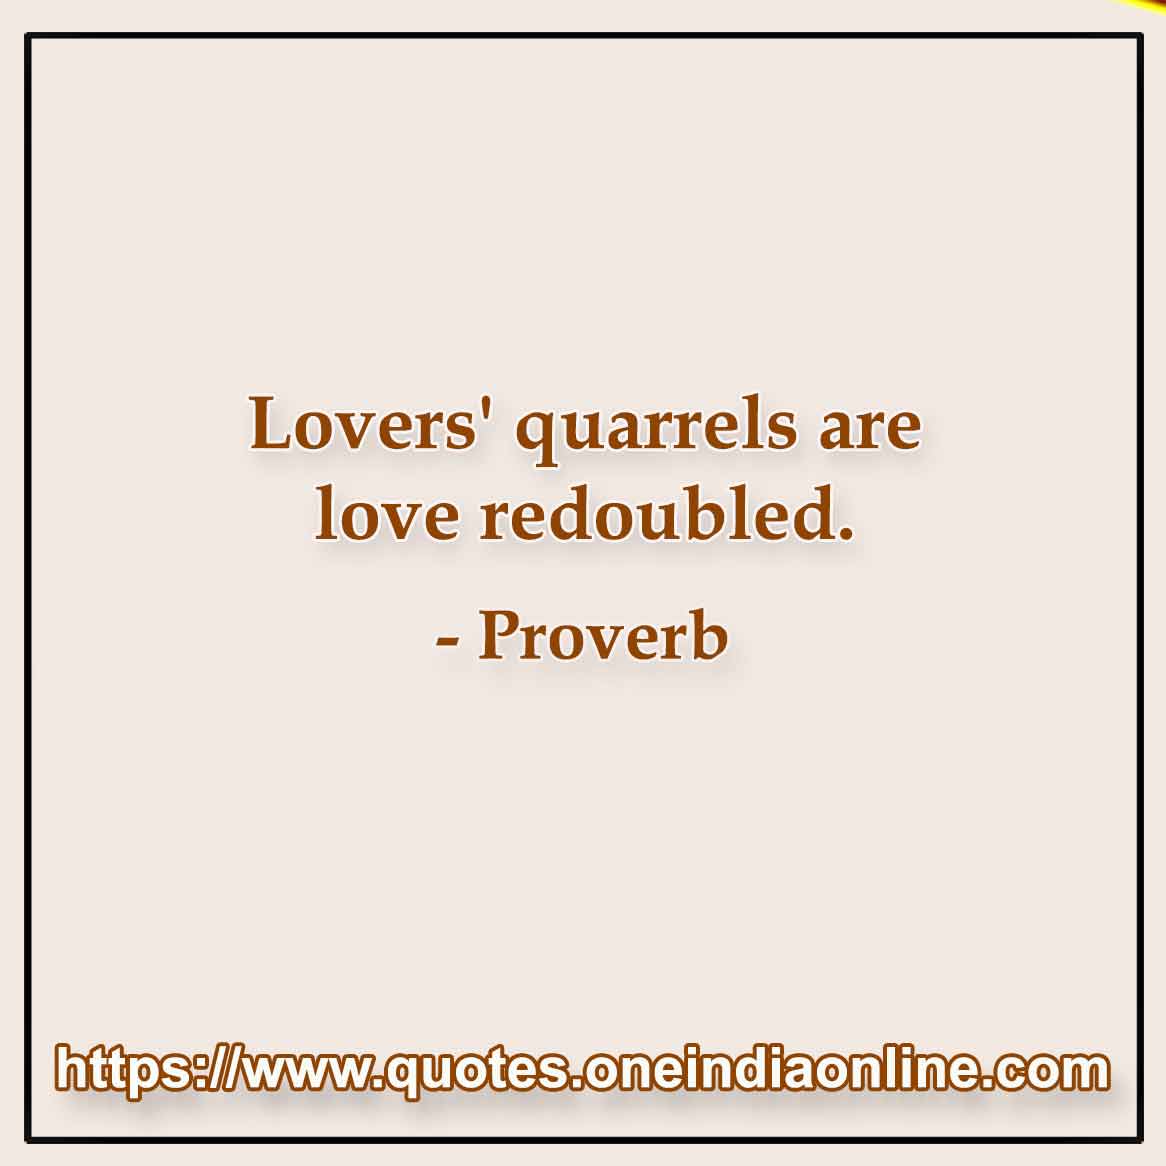 Lovers' quarrels are love redoubled.

